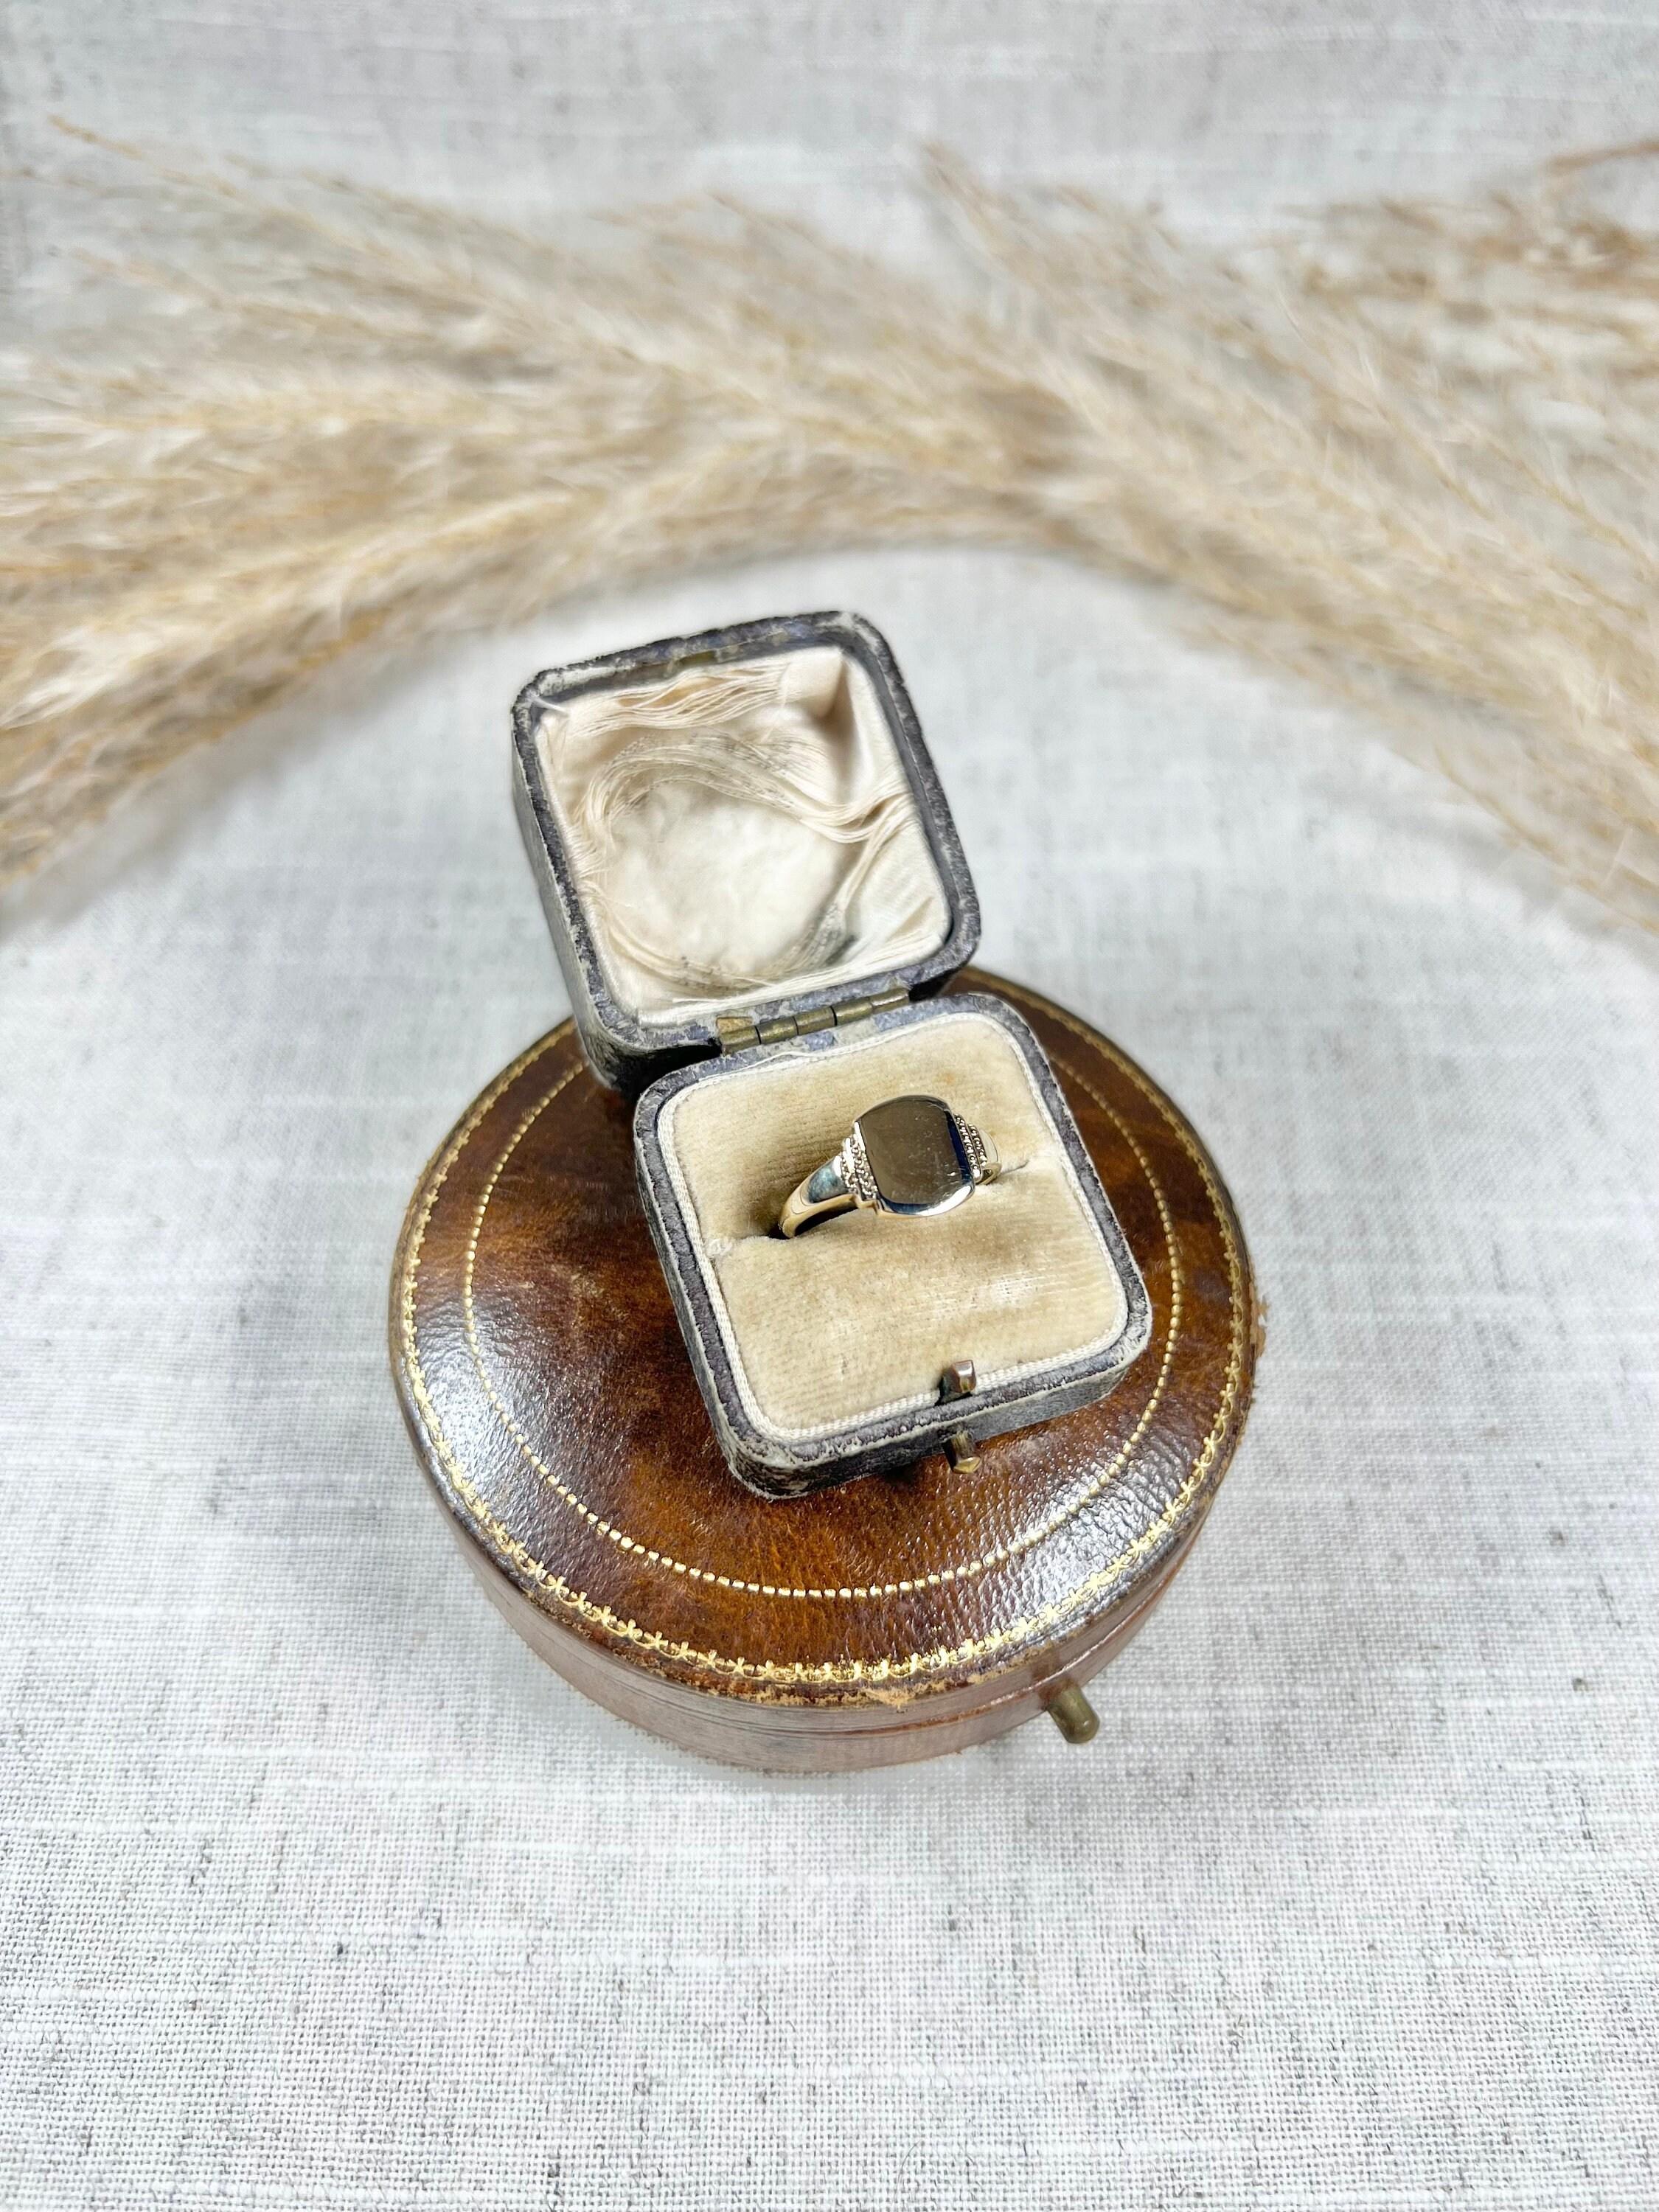 Vintage Signet Ring 

9ct Gold 

Hallmarked Birmingham 1955

Makers Mark C G & S

This vintage 9ct gold signet ring features a rounded square shape with a clean and plain surface, making it a timeless and versatile piece of jewellery. The ring is